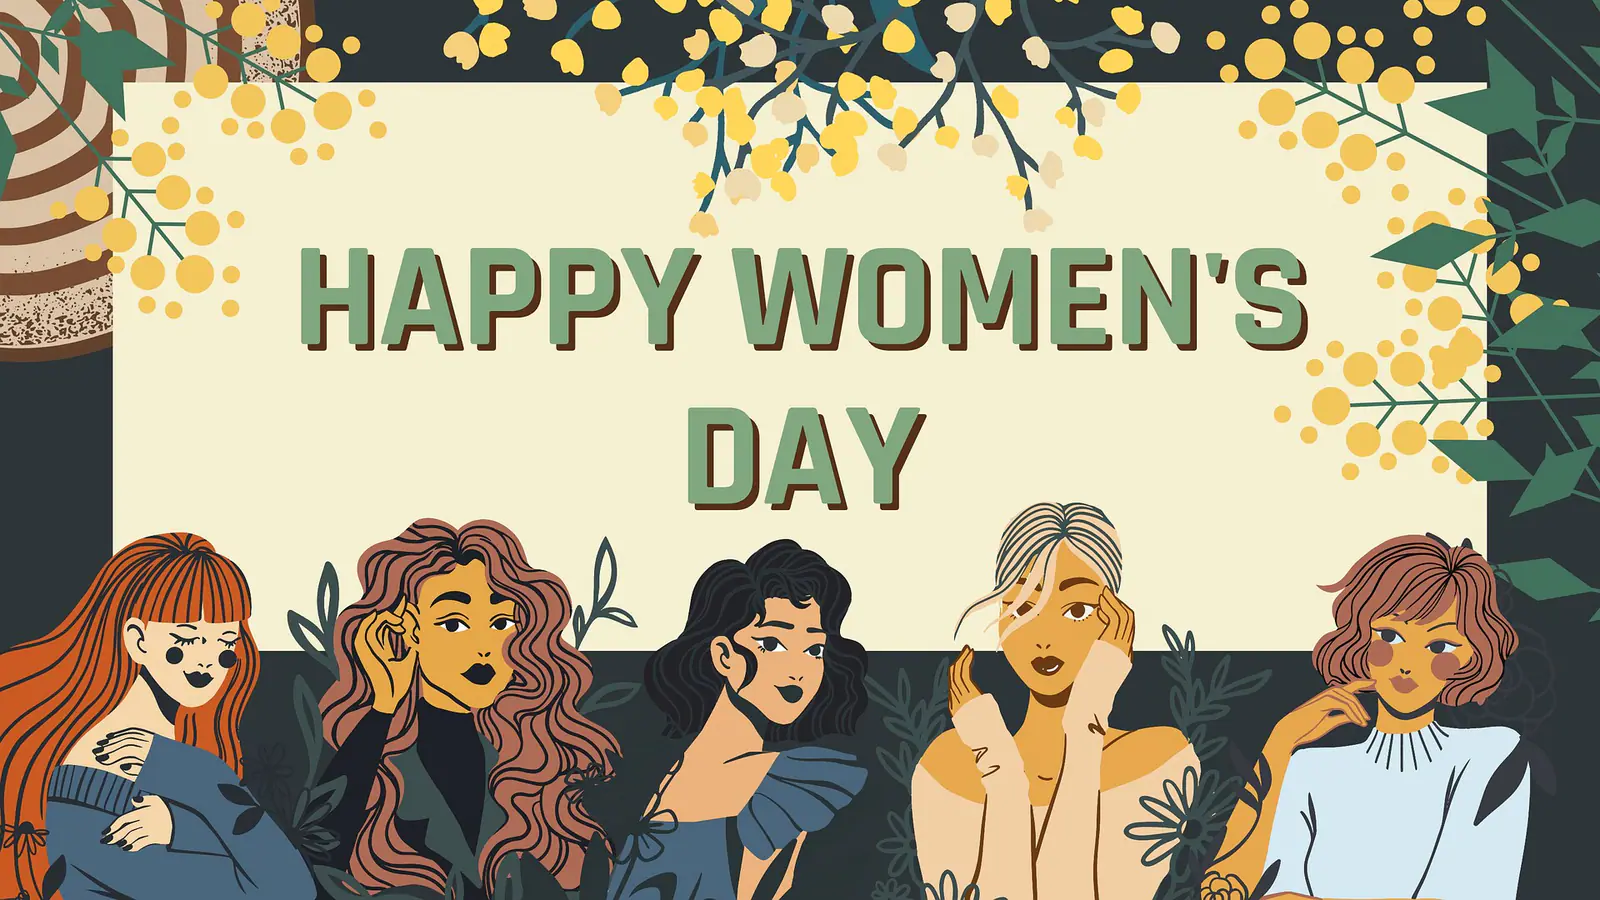 Happy Women’s Day 2022: Check out these 20 inspiring quotes by female authors